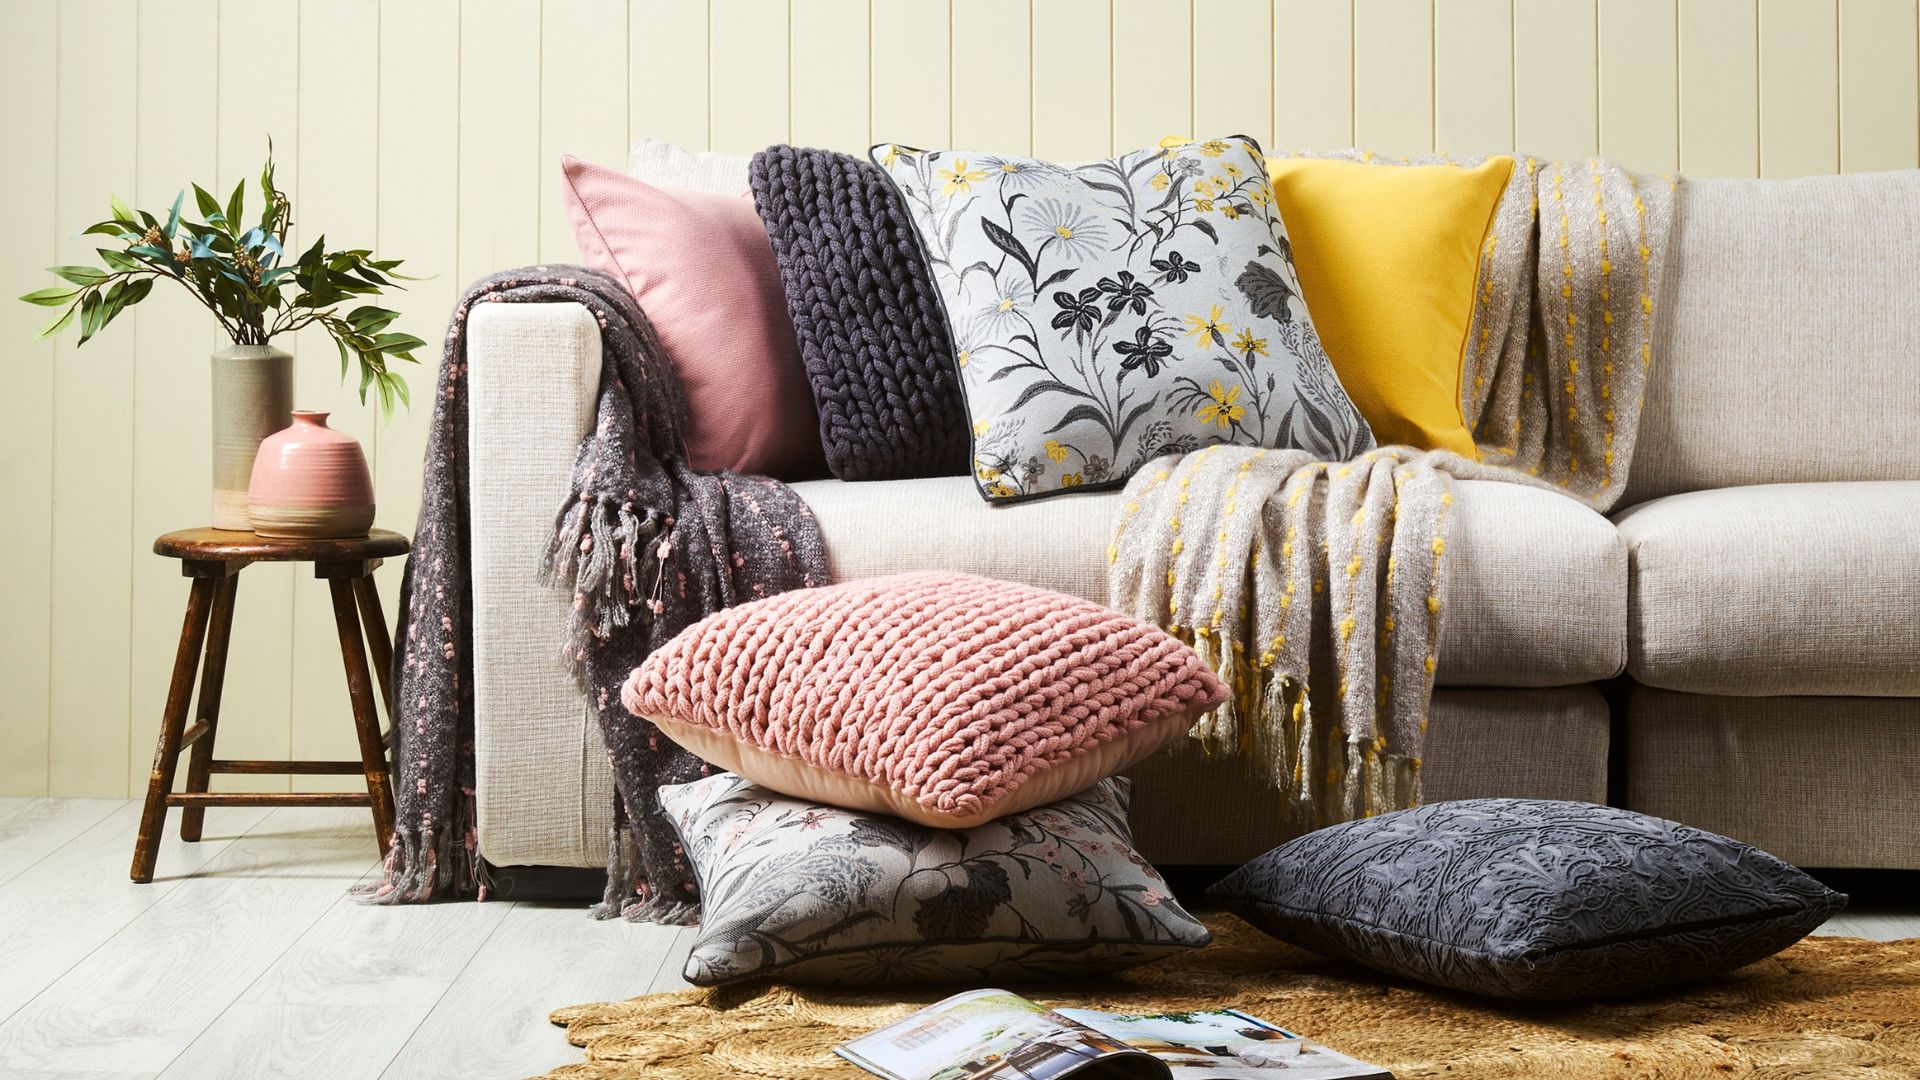 Chunky knit cushion paired with printed floral cushions